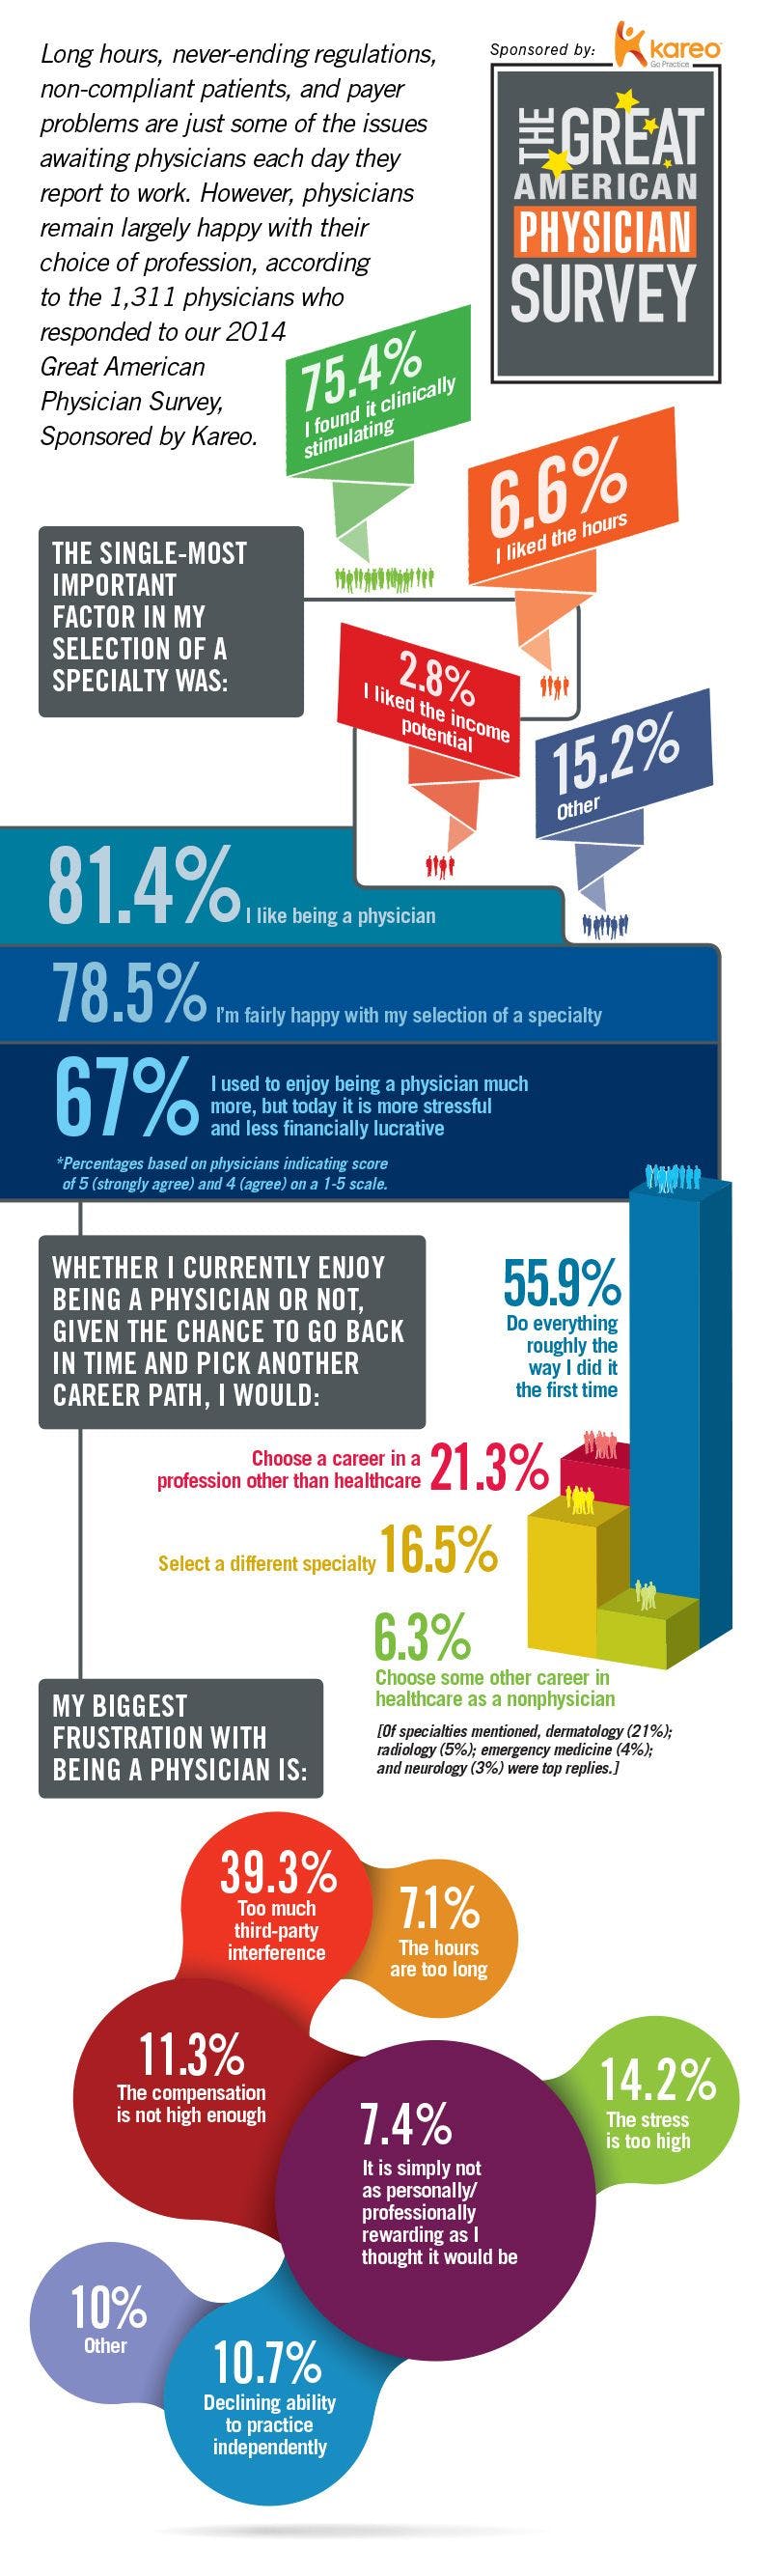 Majority of Physicians Remain Happy with Career Choice